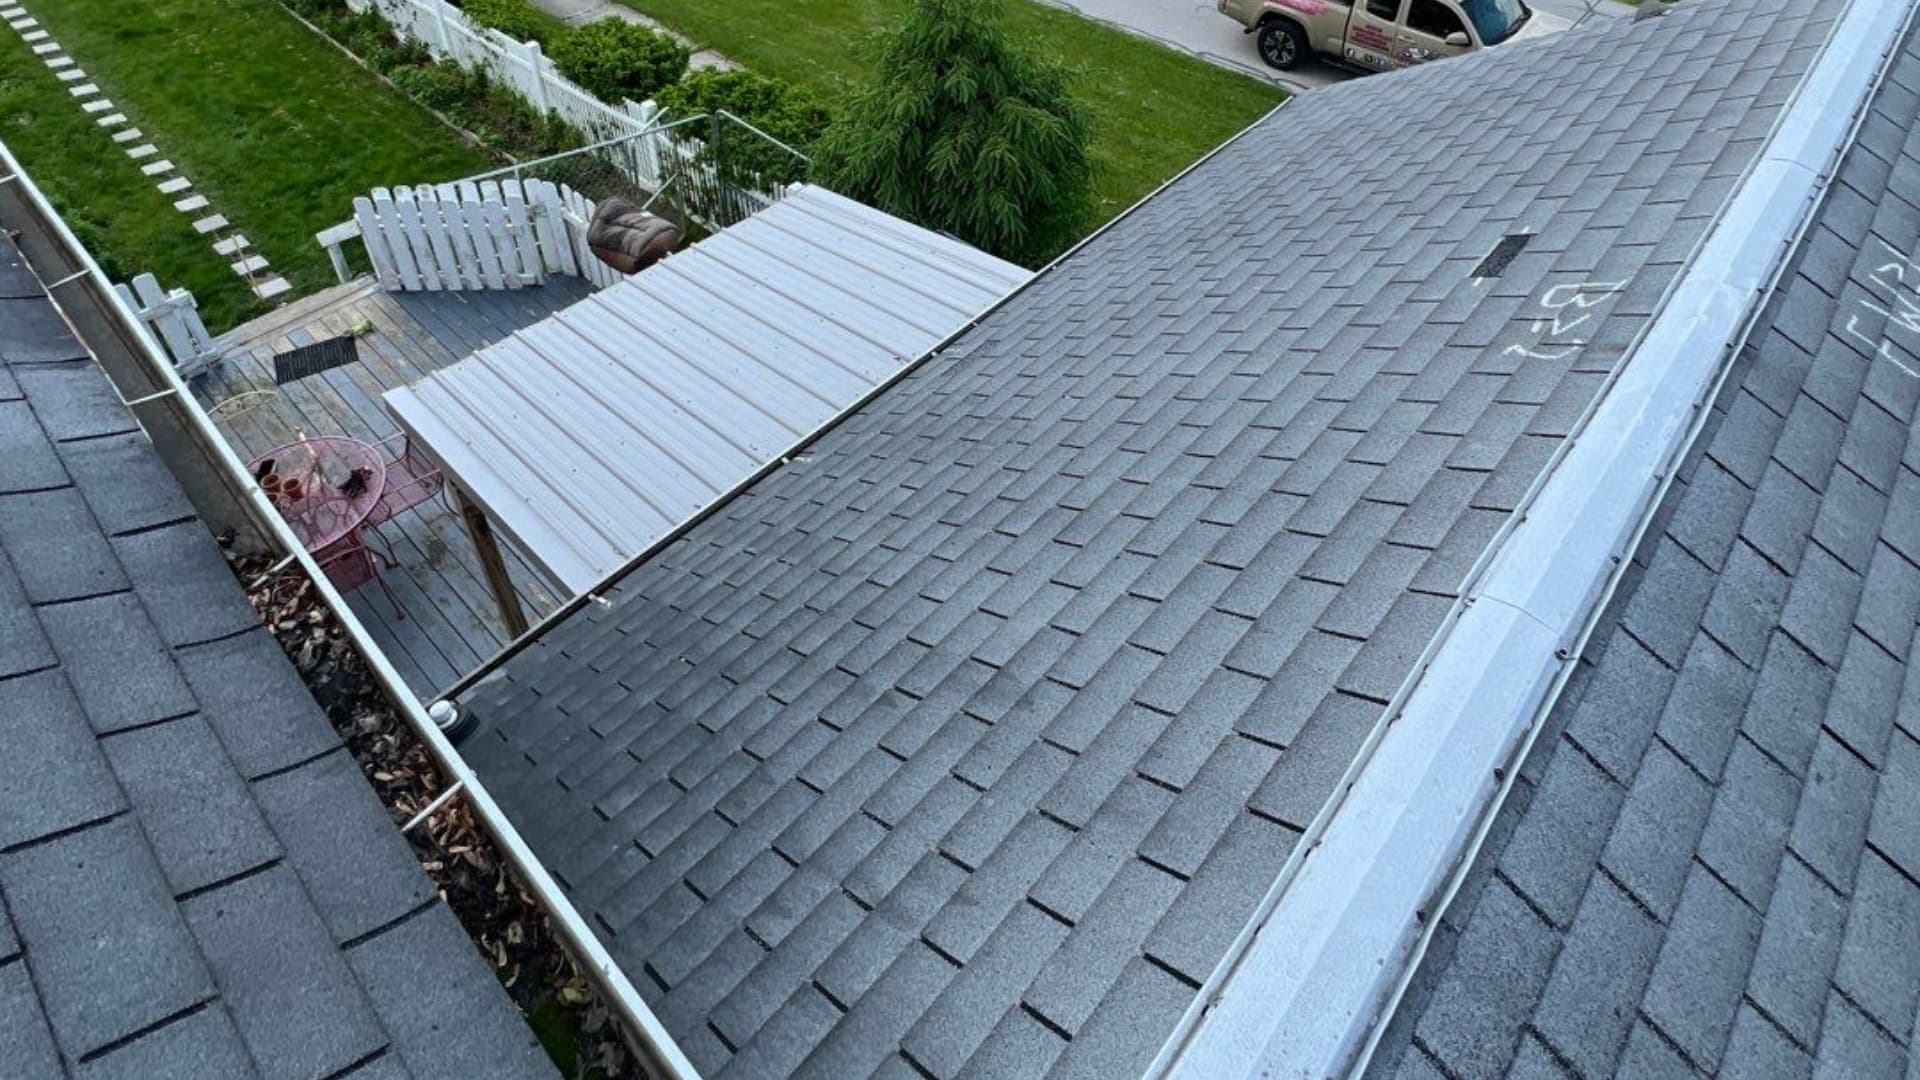 Our work is showcased in the view from a rooftop with gray shingles, a well-maintained gutter, and a fenced yard featuring a covered patio below.